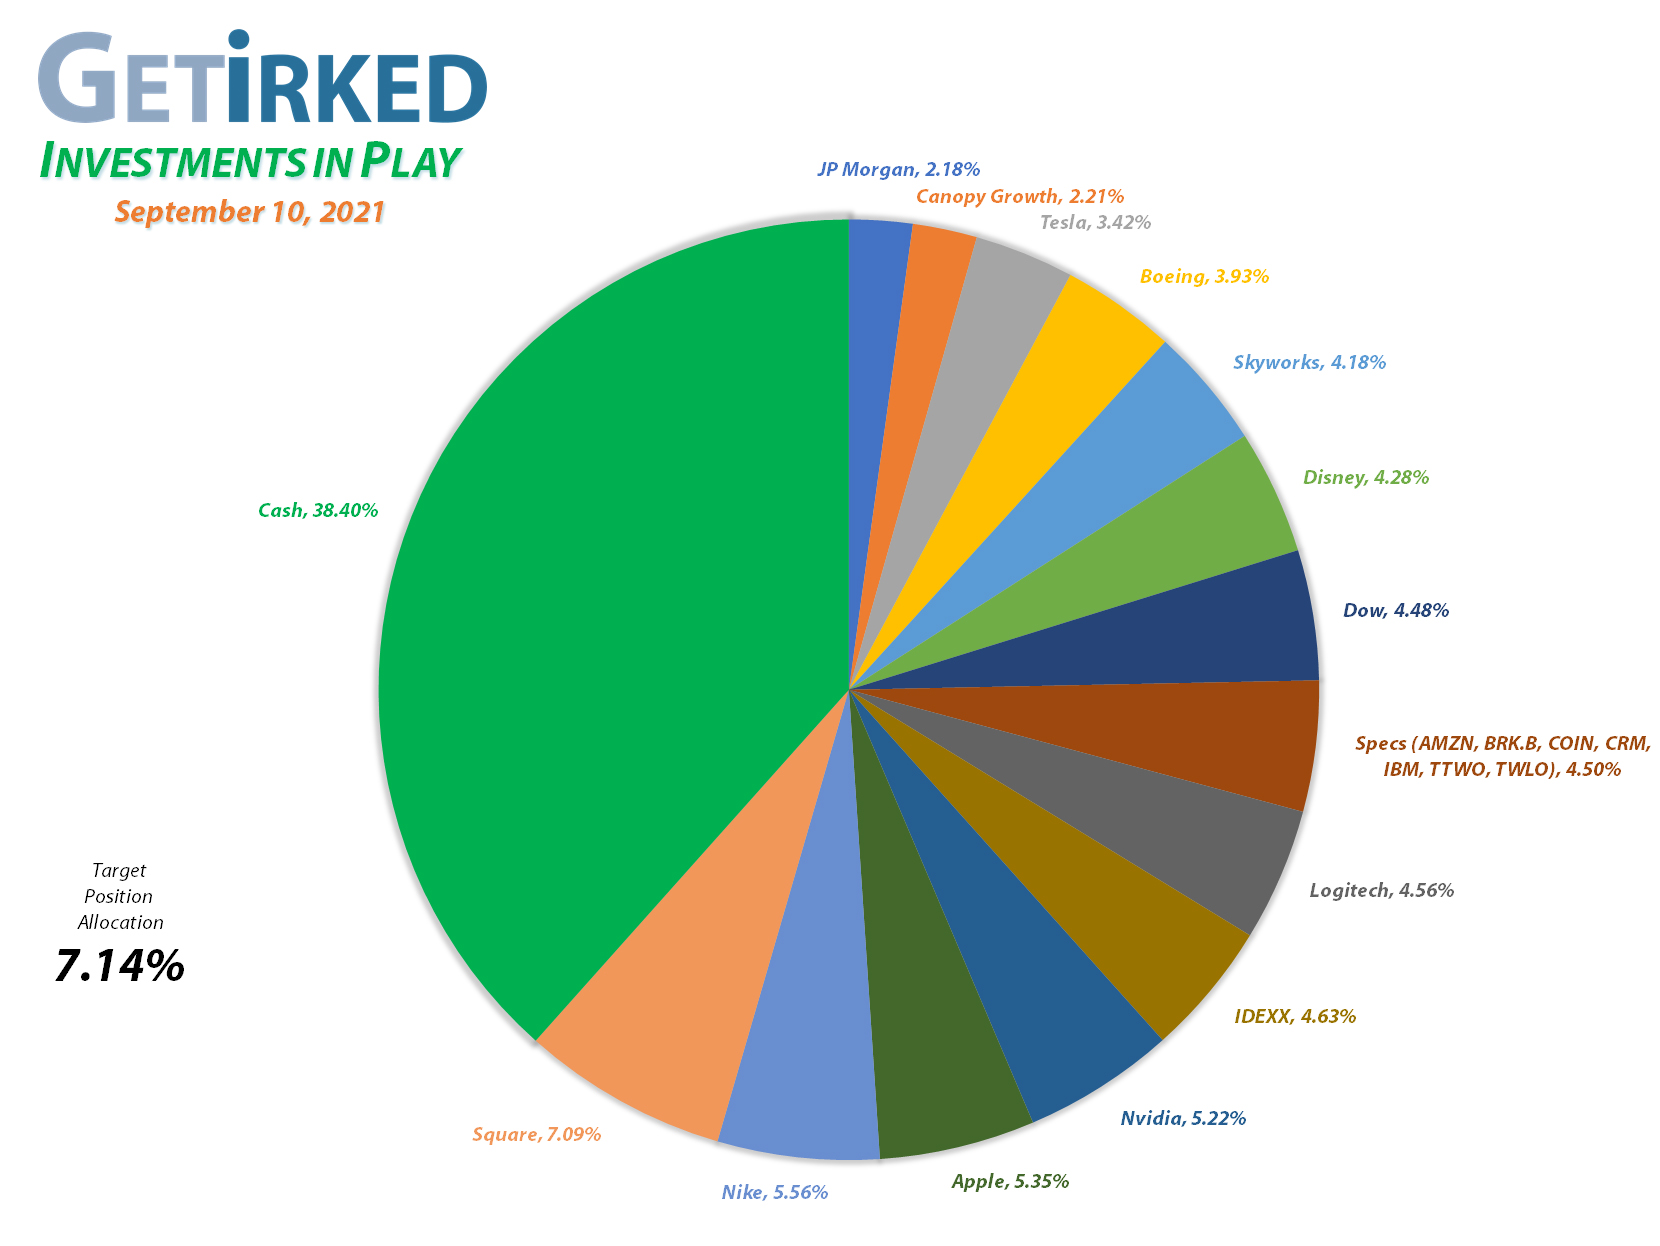 Get Irked - Investments in Play - Current Holdings - March 12, 2021et Irked's Pandemic Portfolio Holdings as of September 10, 2021